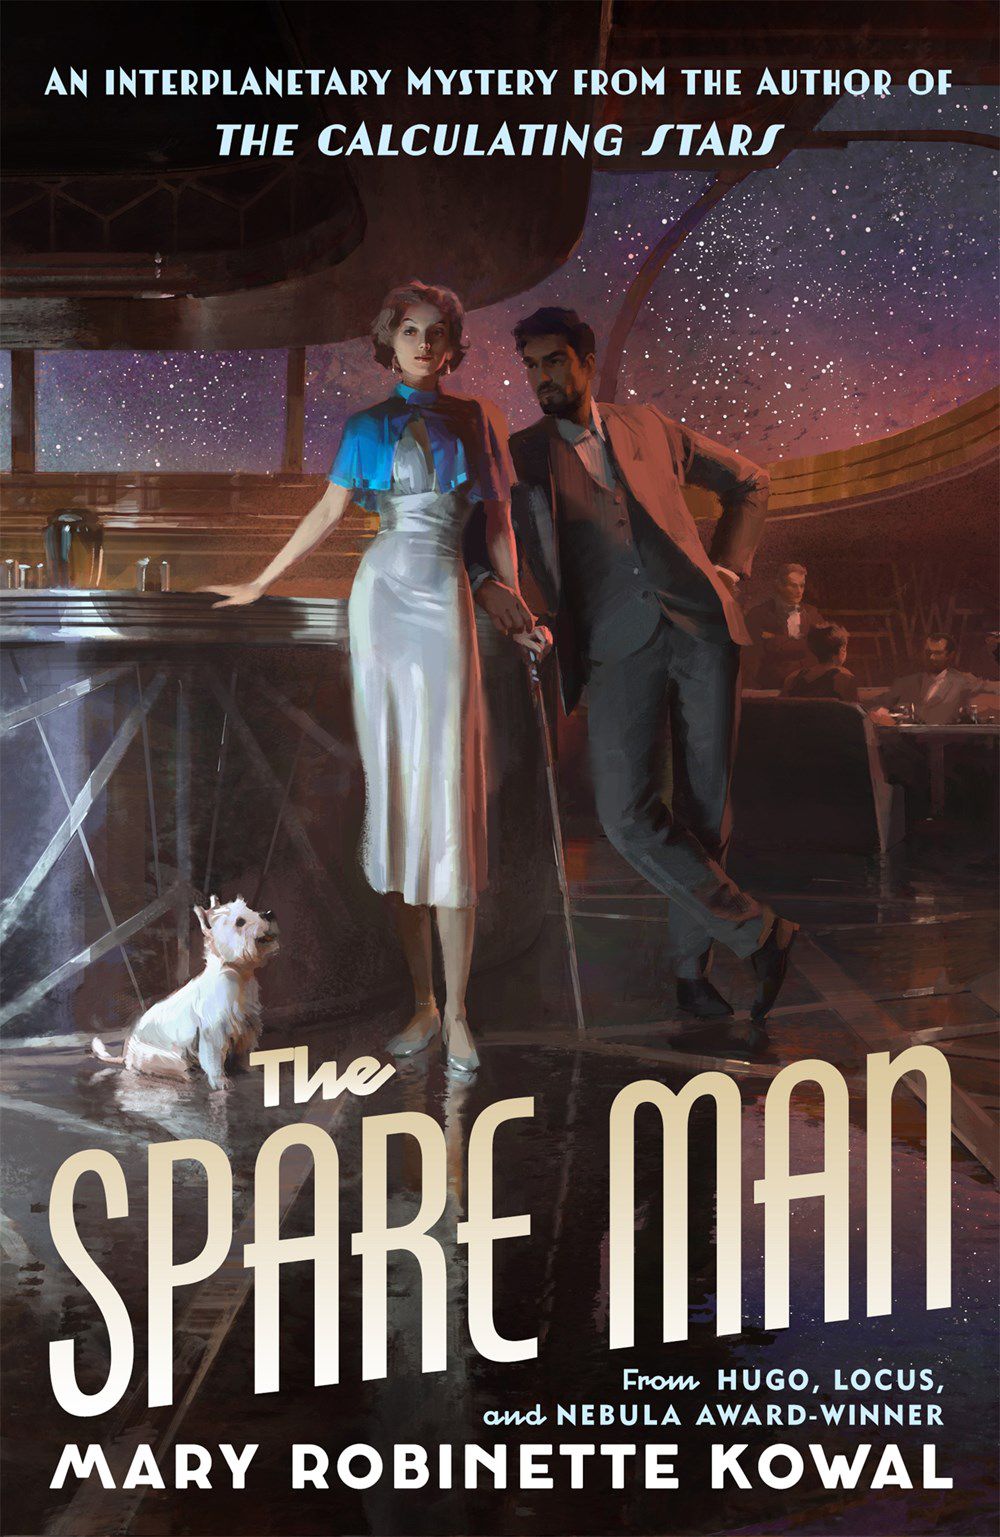 Cover image for Mary Robinette Kowal’s The Spare Man, featuring two figures standing in front of a bar with a dog sitting next to them